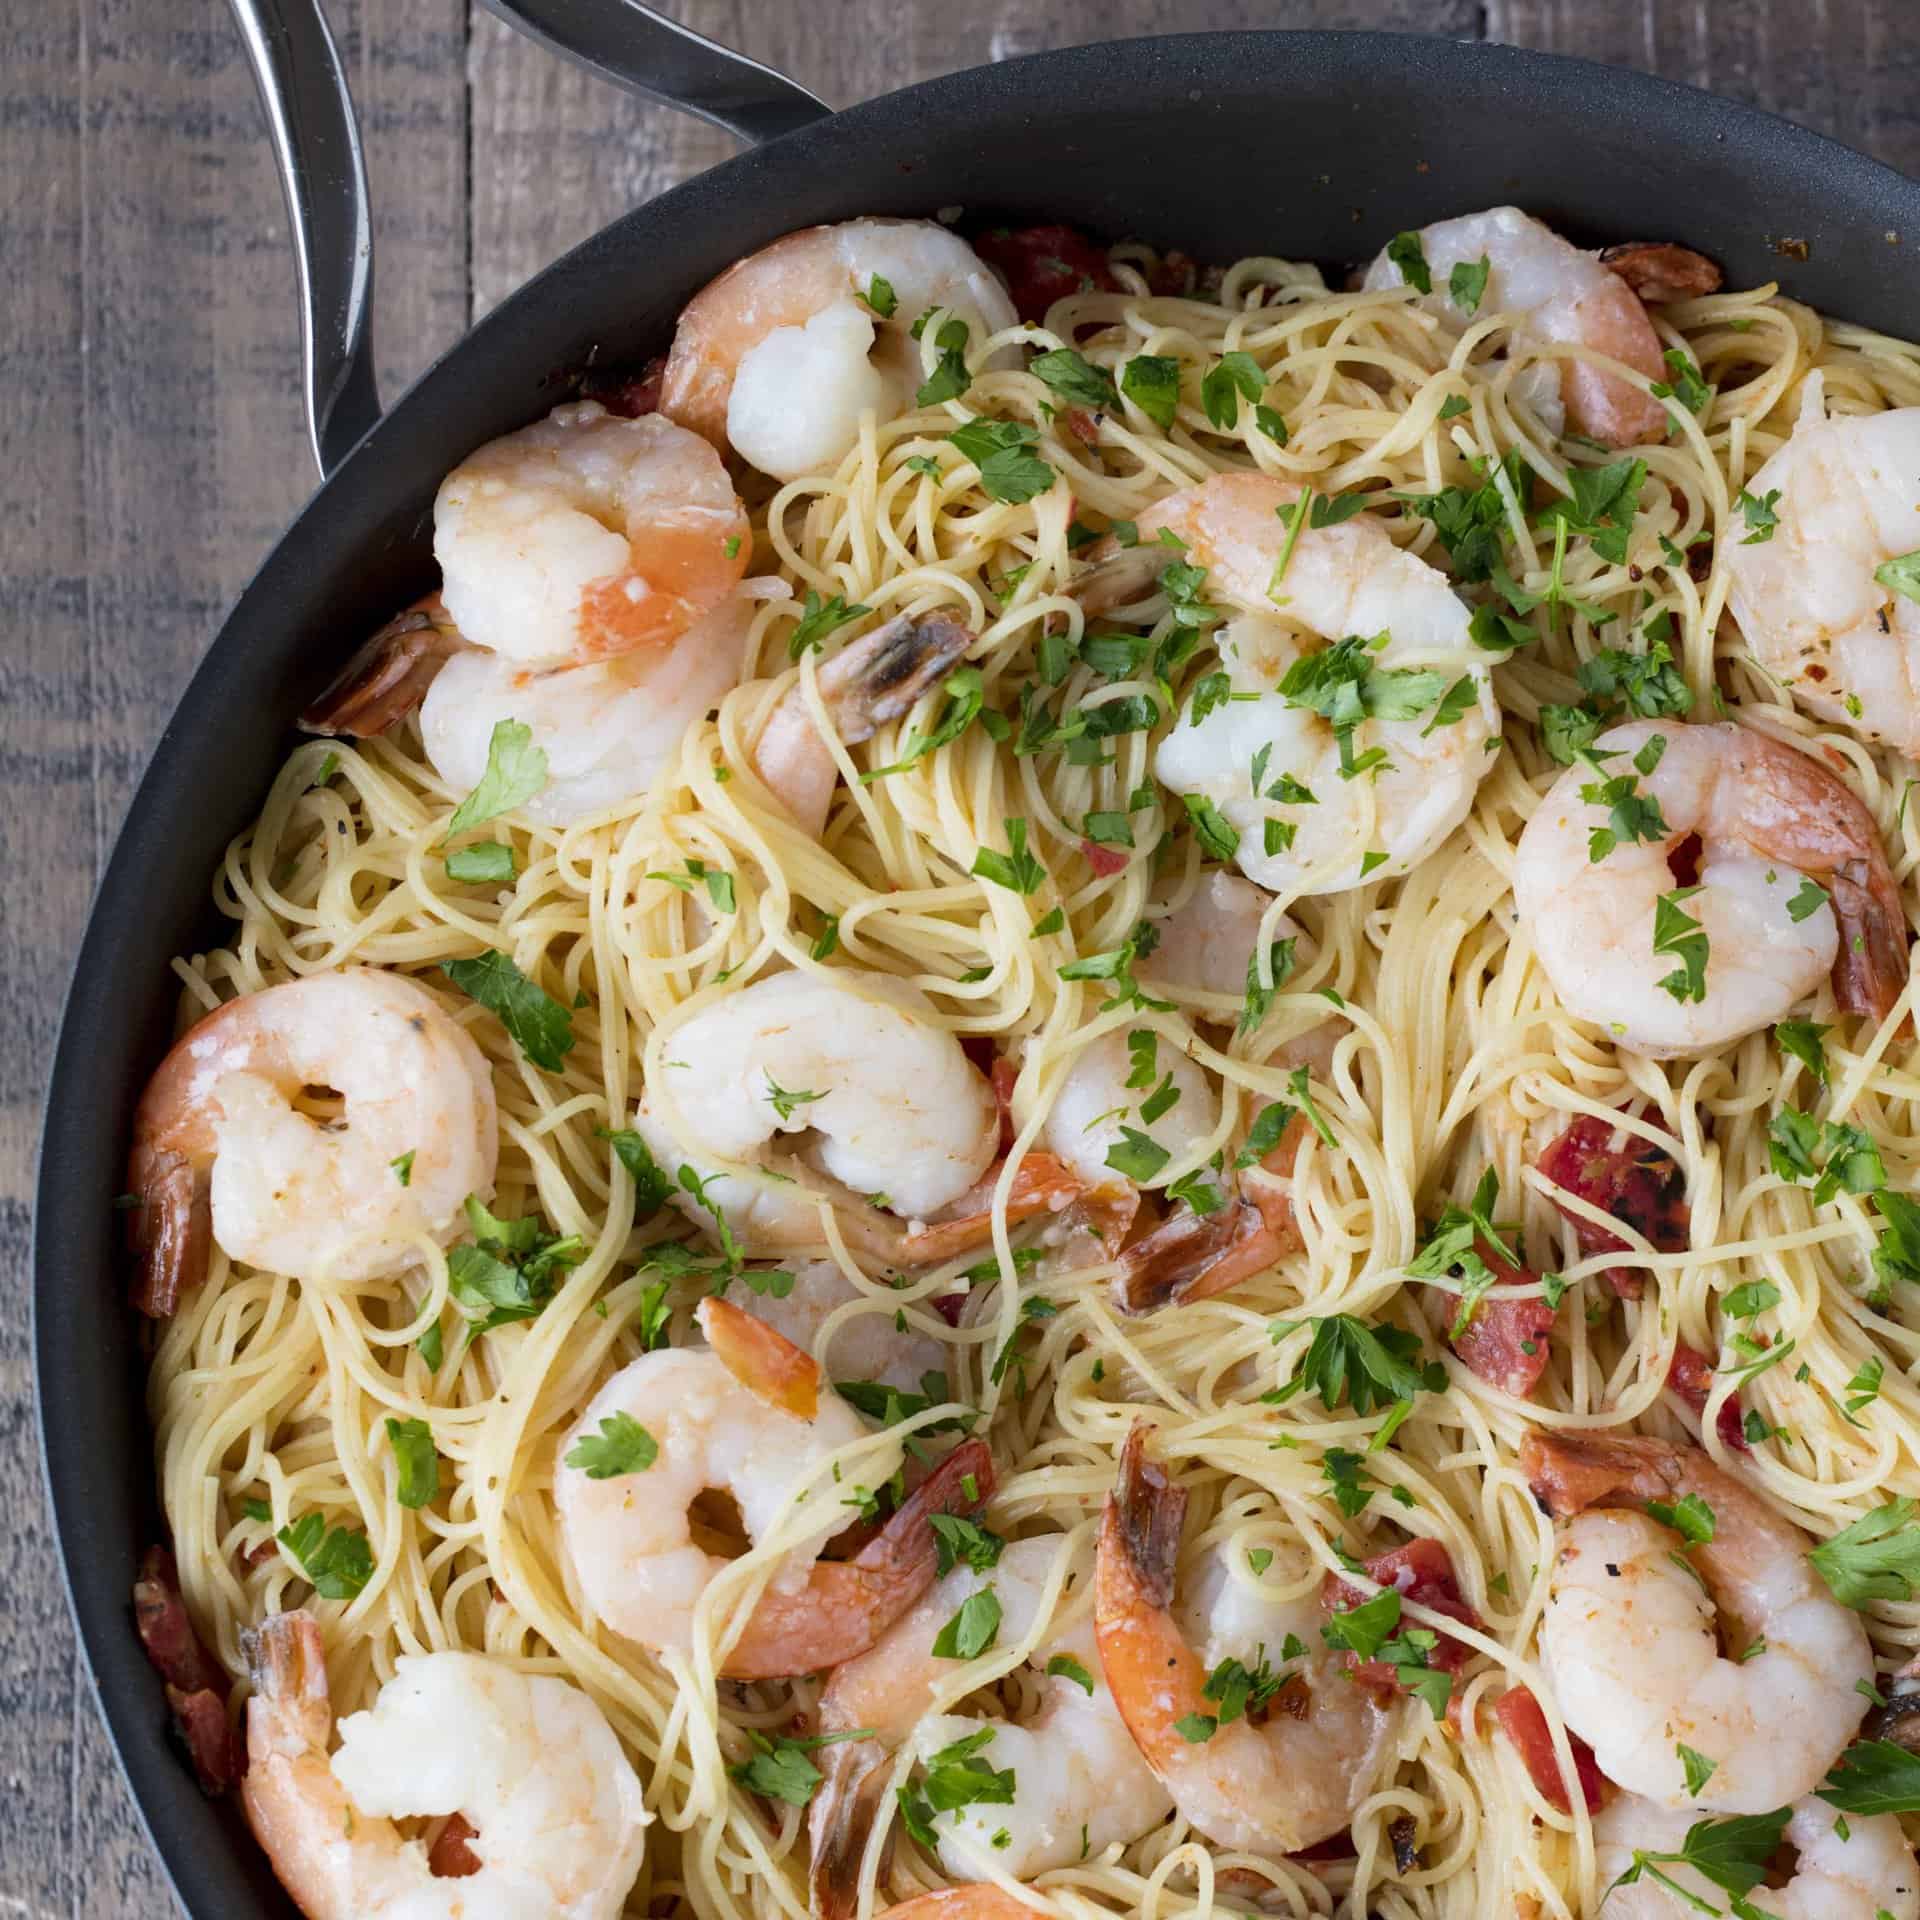 This Easy Creamy Tomato Shrimp Angel Hair Pasta is ready in just 15 minutes, but it tastes like it came from a restaurant. This will quickly become a family favorite!